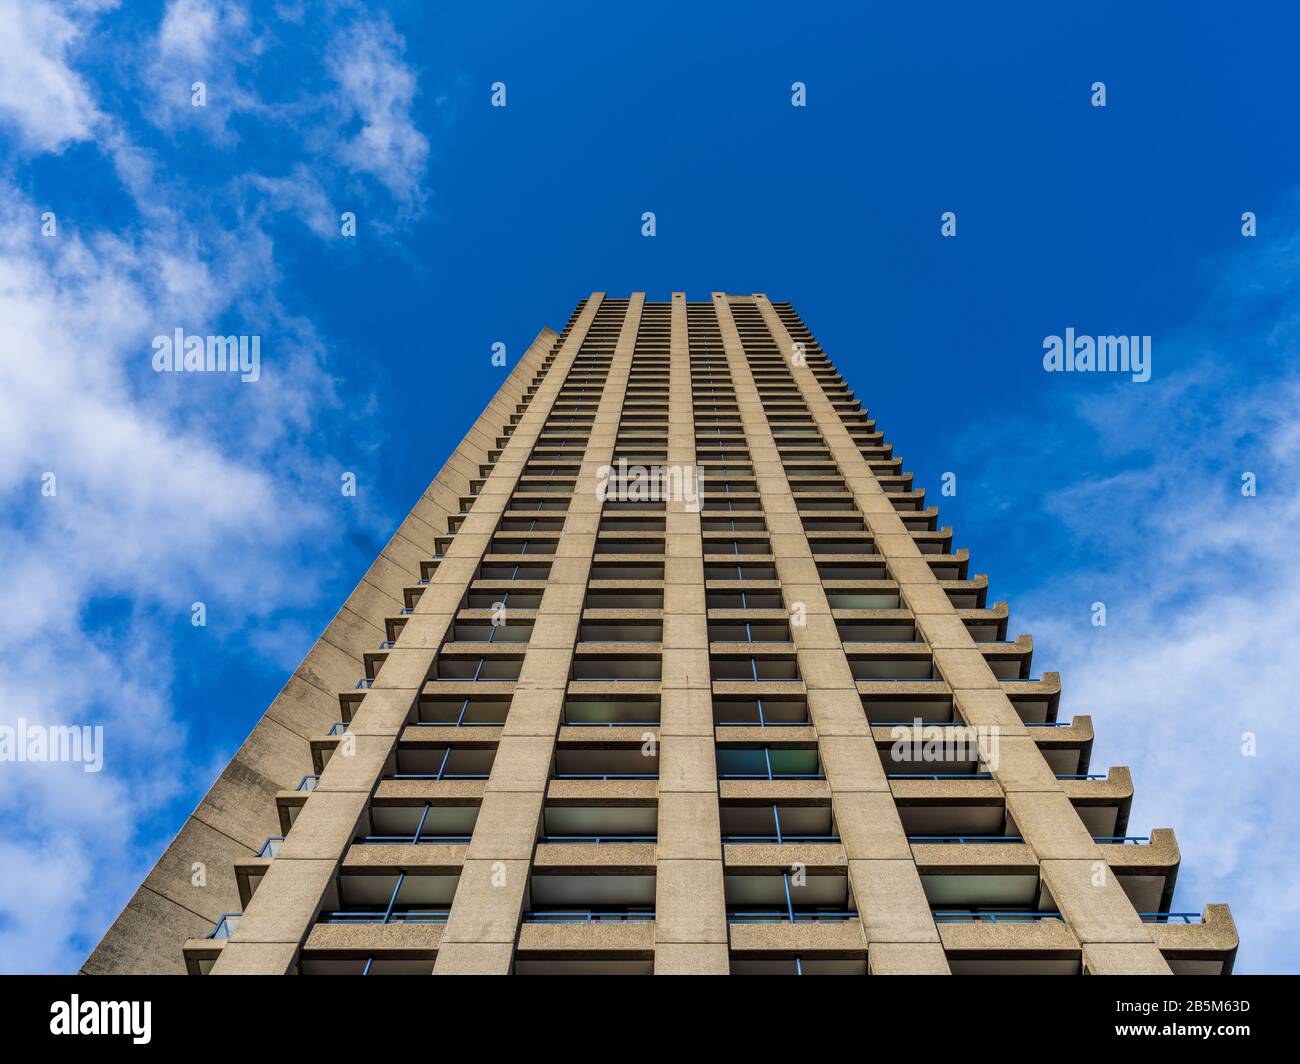 Shakespeare Tower Barbican London, residential tower 42 Storeys, completed 1976. Architects Chamberlin, Powell and Bon.  Brutalist Style Architecture. Stock Photo